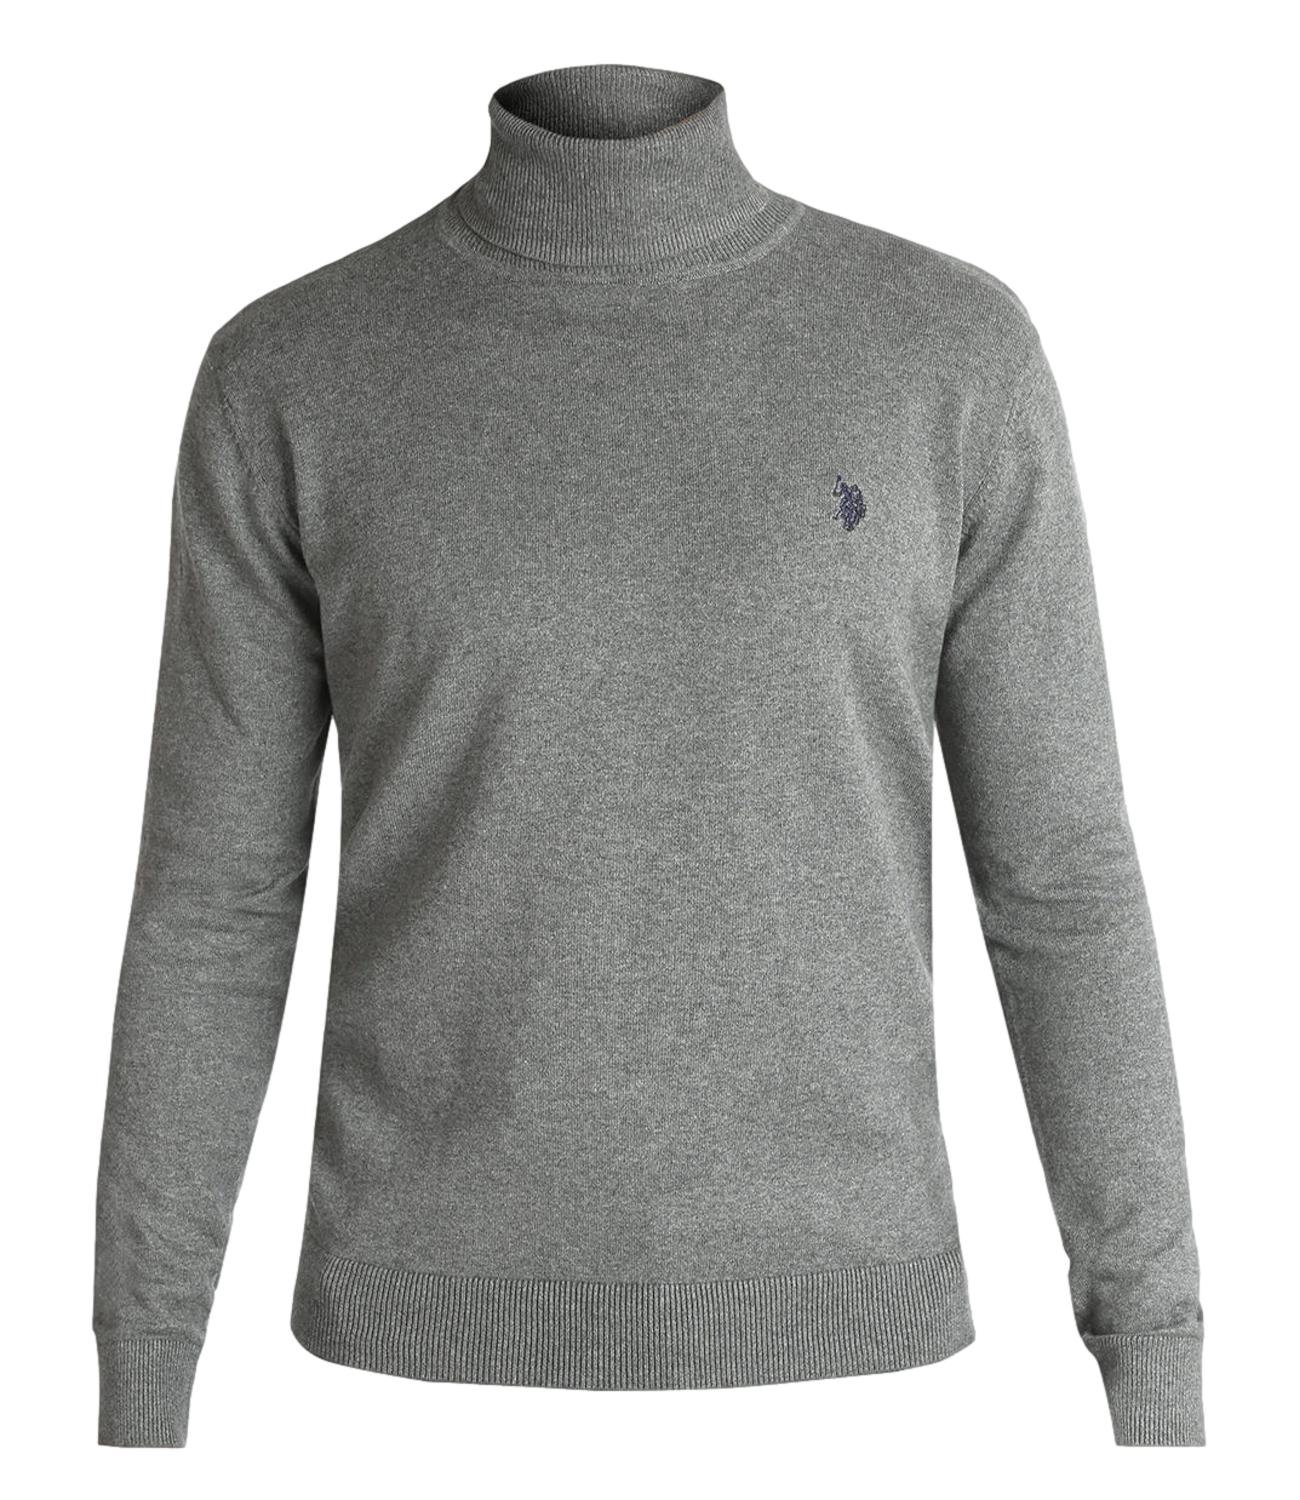 US Polo Assn gray men's sweater with black wool logo